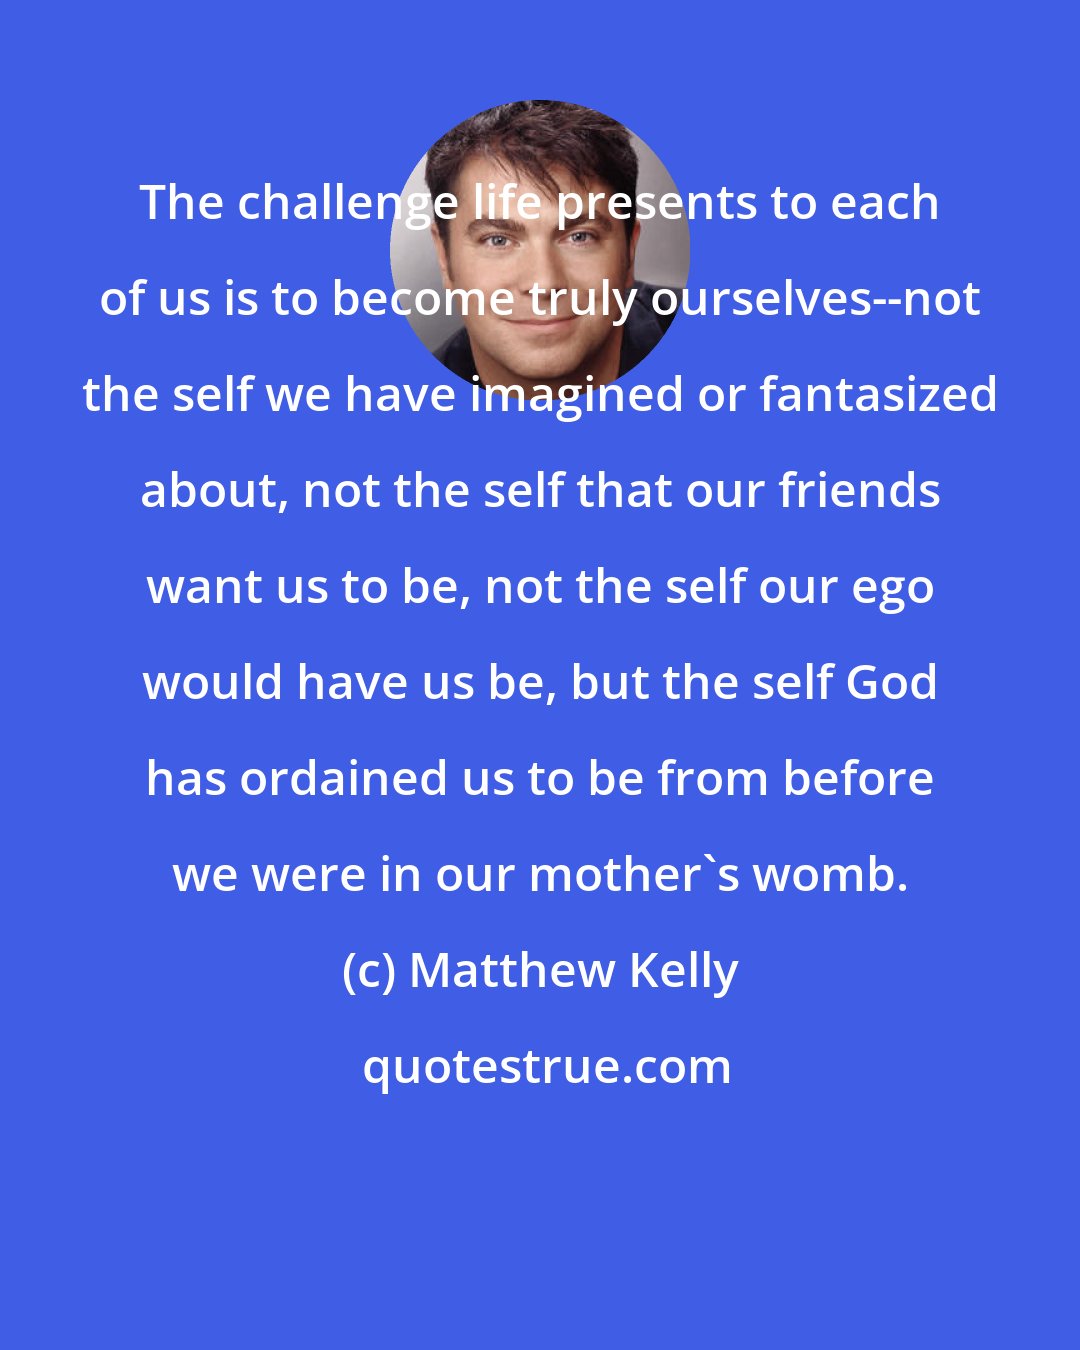 Matthew Kelly: The challenge life presents to each of us is to become truly ourselves--not the self we have imagined or fantasized about, not the self that our friends want us to be, not the self our ego would have us be, but the self God has ordained us to be from before we were in our mother's womb.